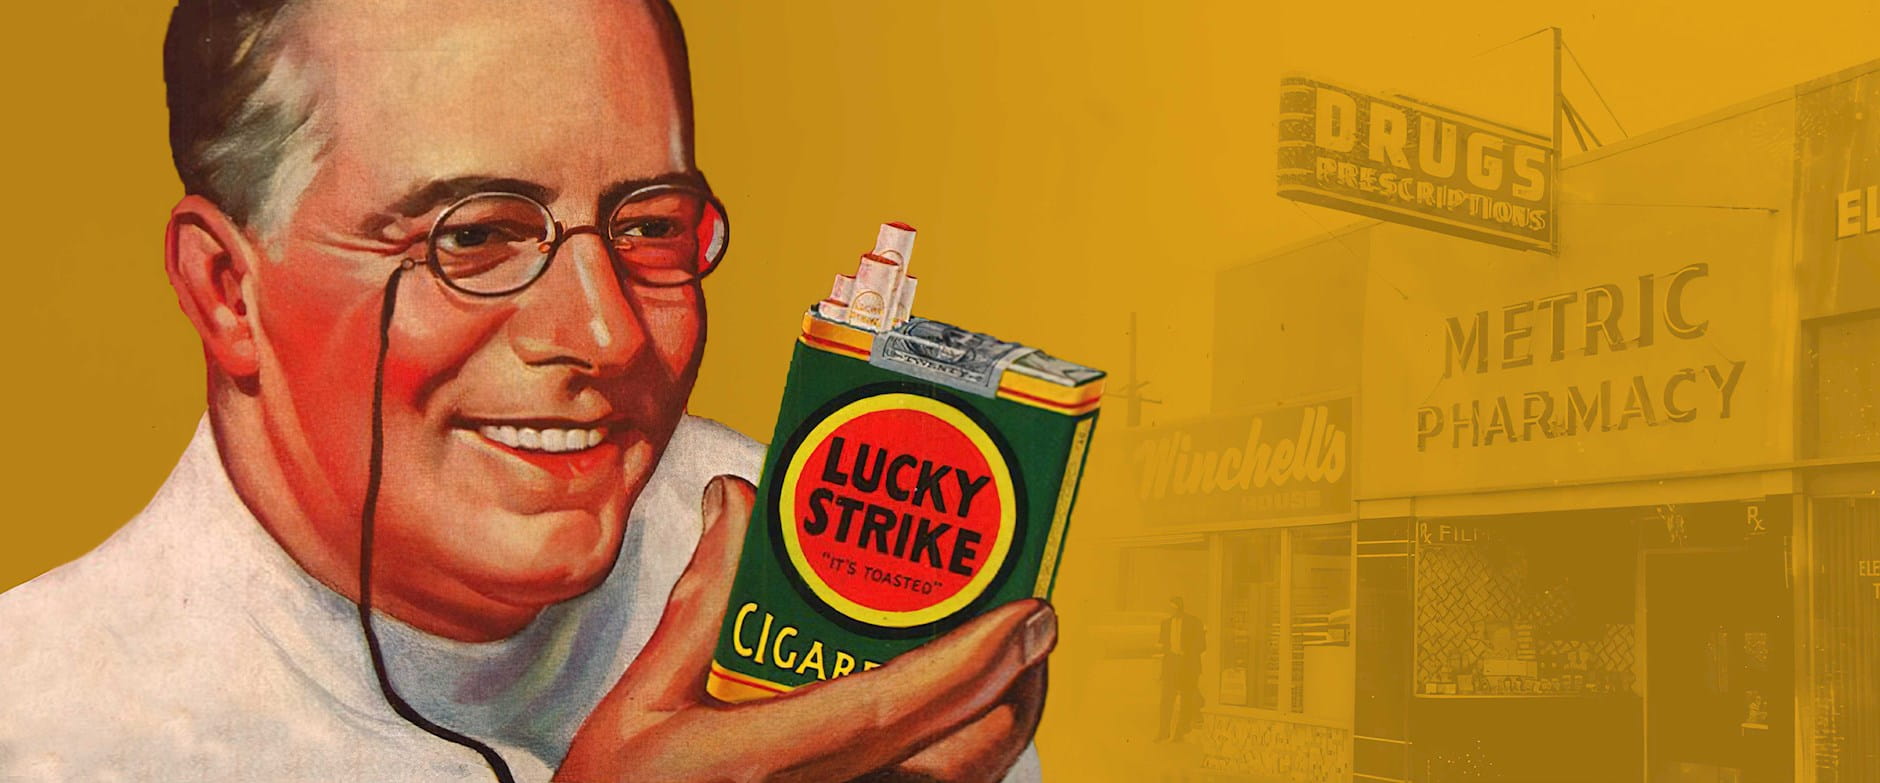 Doctor holding a pack of Lucky Strikes